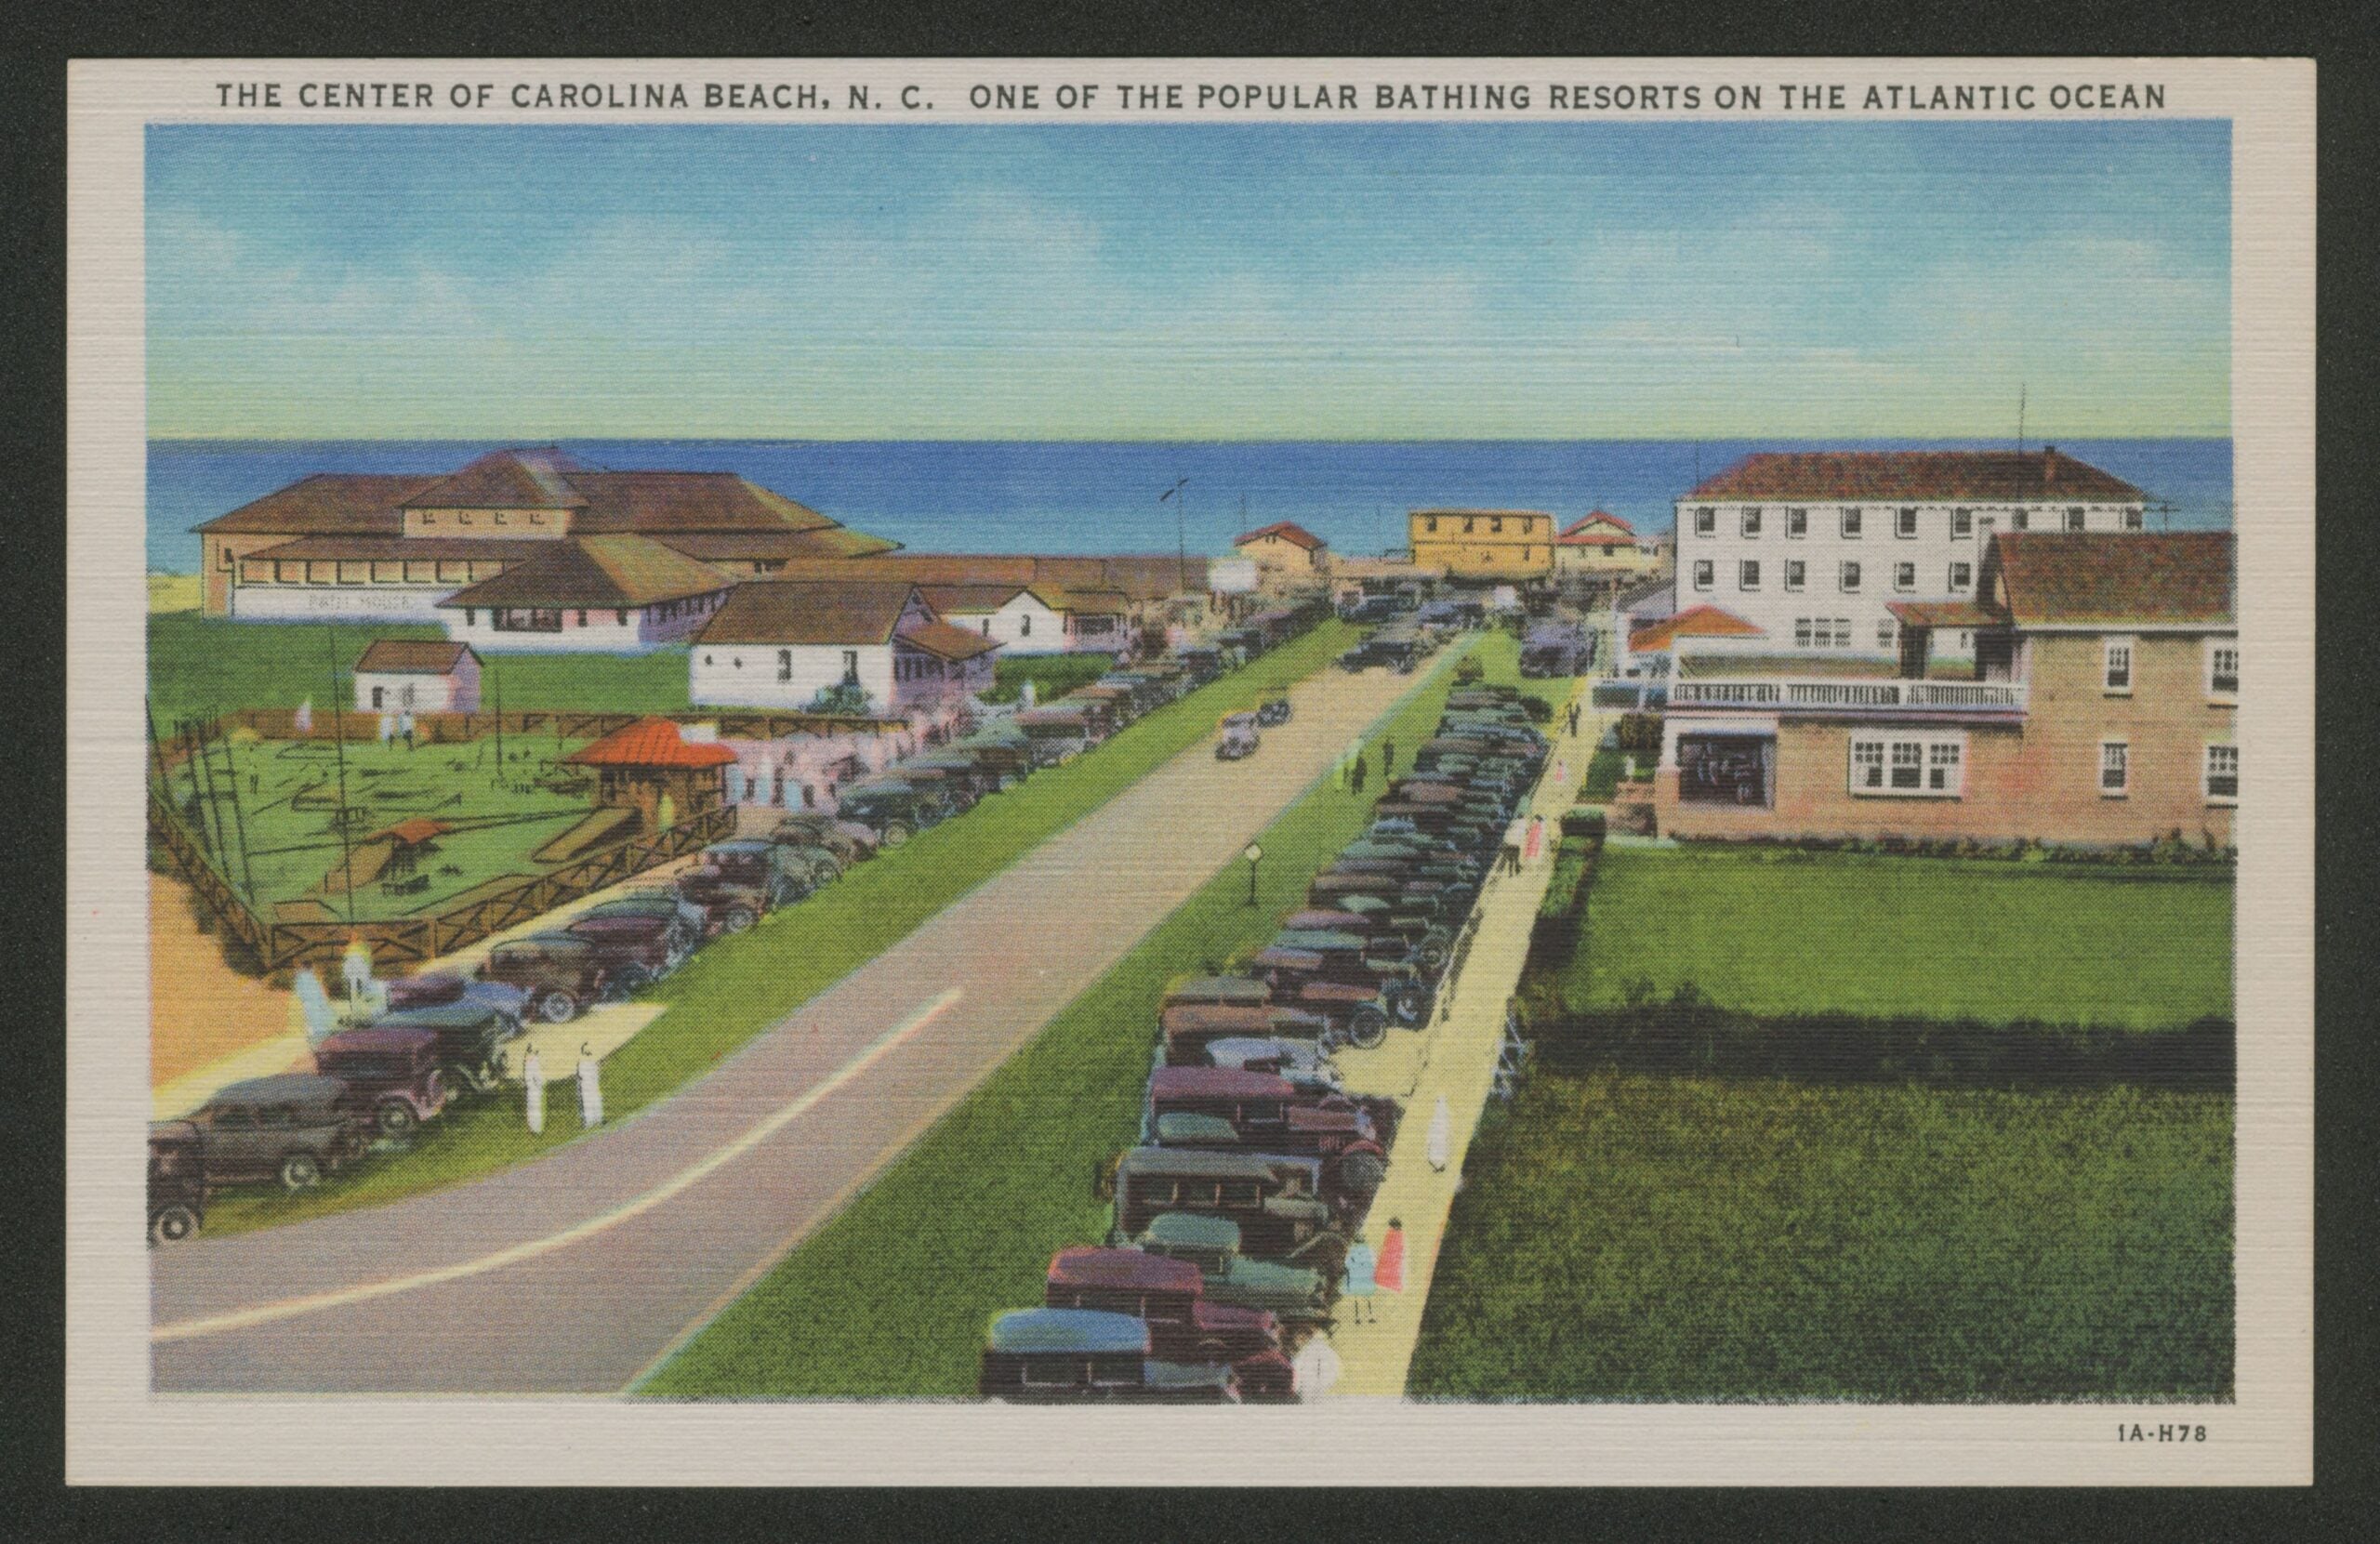 Postcard depicting a street with the ocean in the background, showing cars parked and pedestrians on the boardwalk.